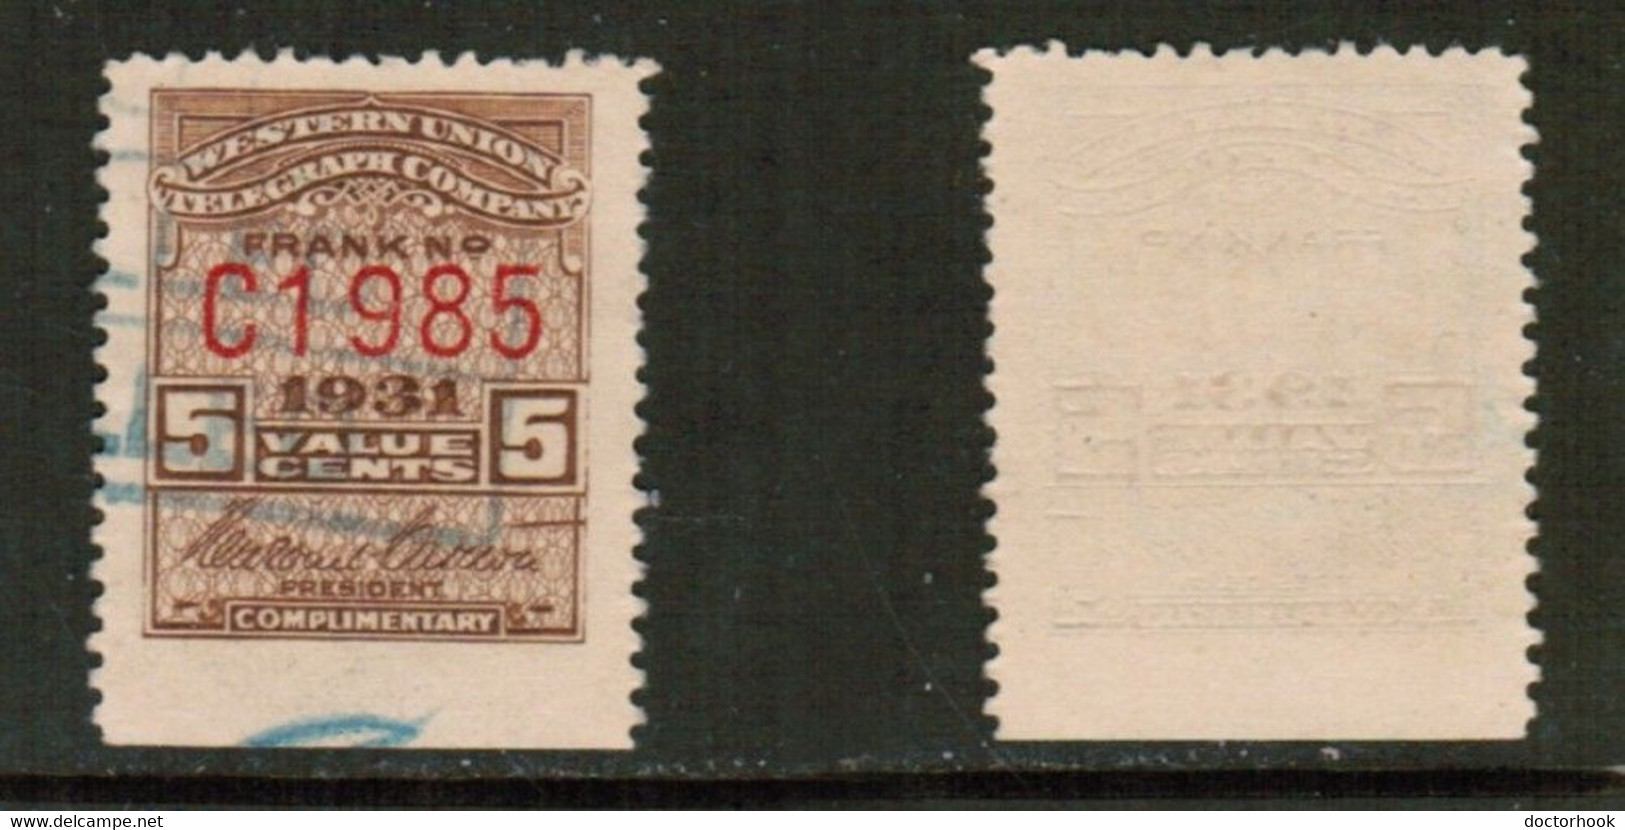 U.S.A.  1931---5 CENT WESTERN UNION TELEGRAPH STAMP USED (CONDITION AS PER SCAN) (Stamp Scan # 839-15) - Télégraphes